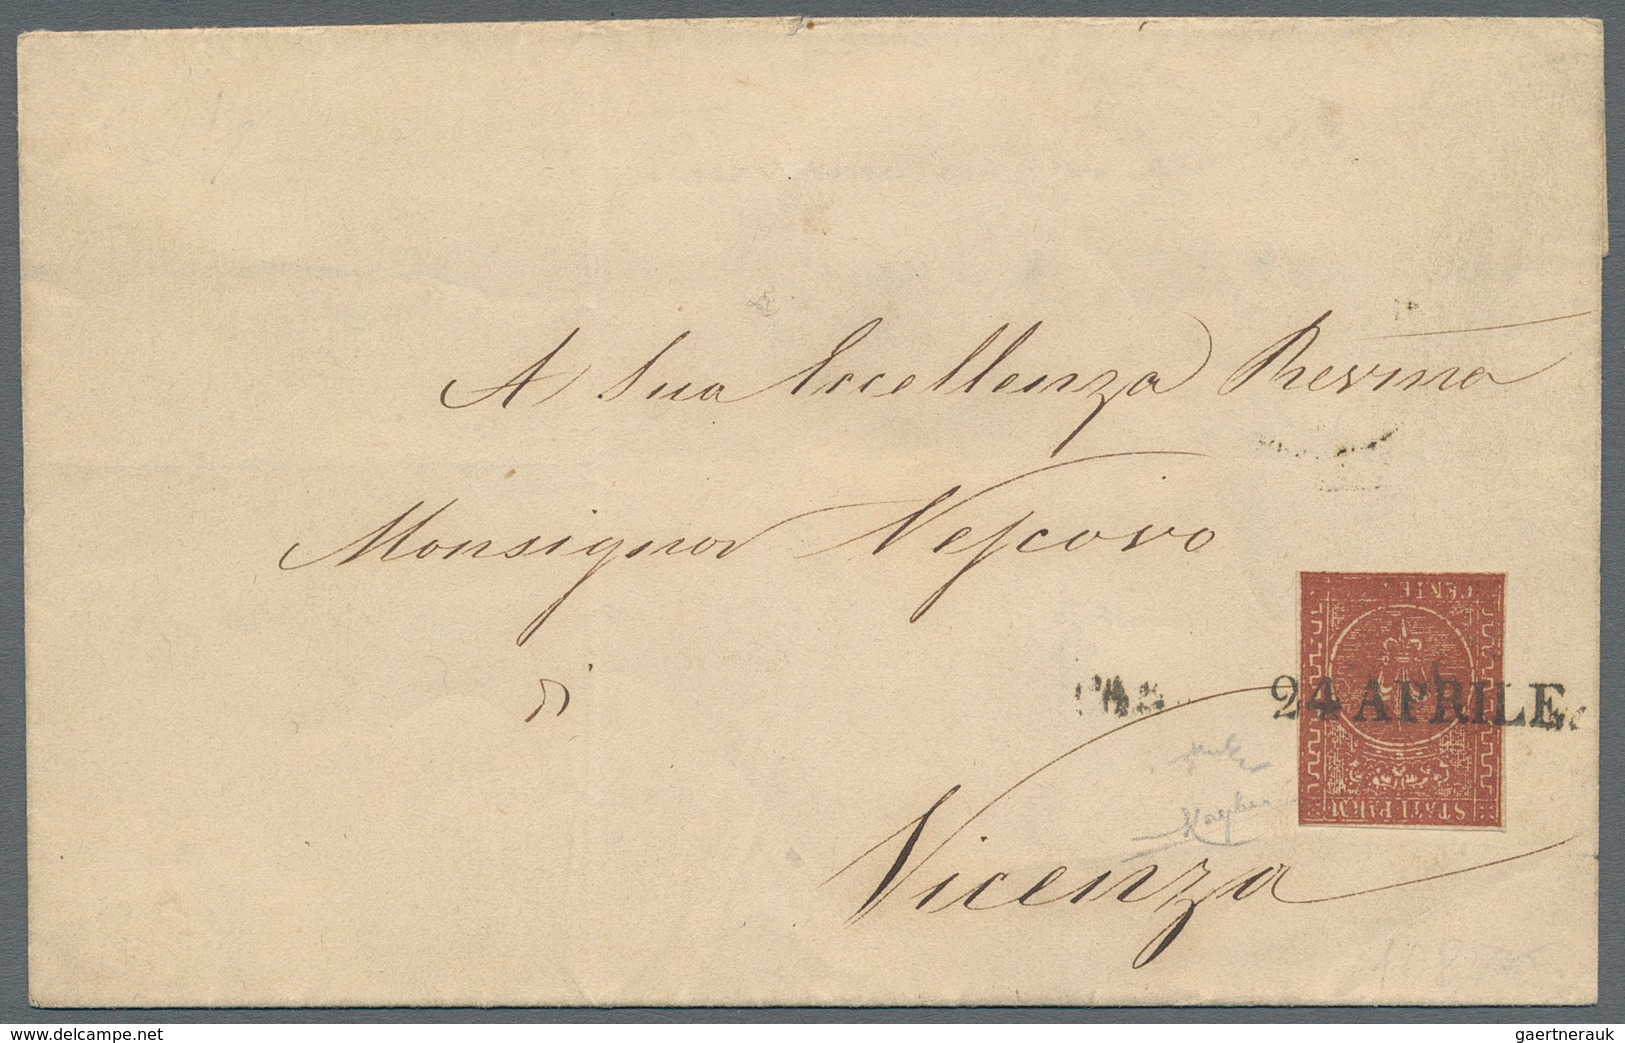 Italien - Altitalienische Staaten: Parma: 1855, 25 Cent. Red-brown, Single Franking On Letter Tied B - Parme